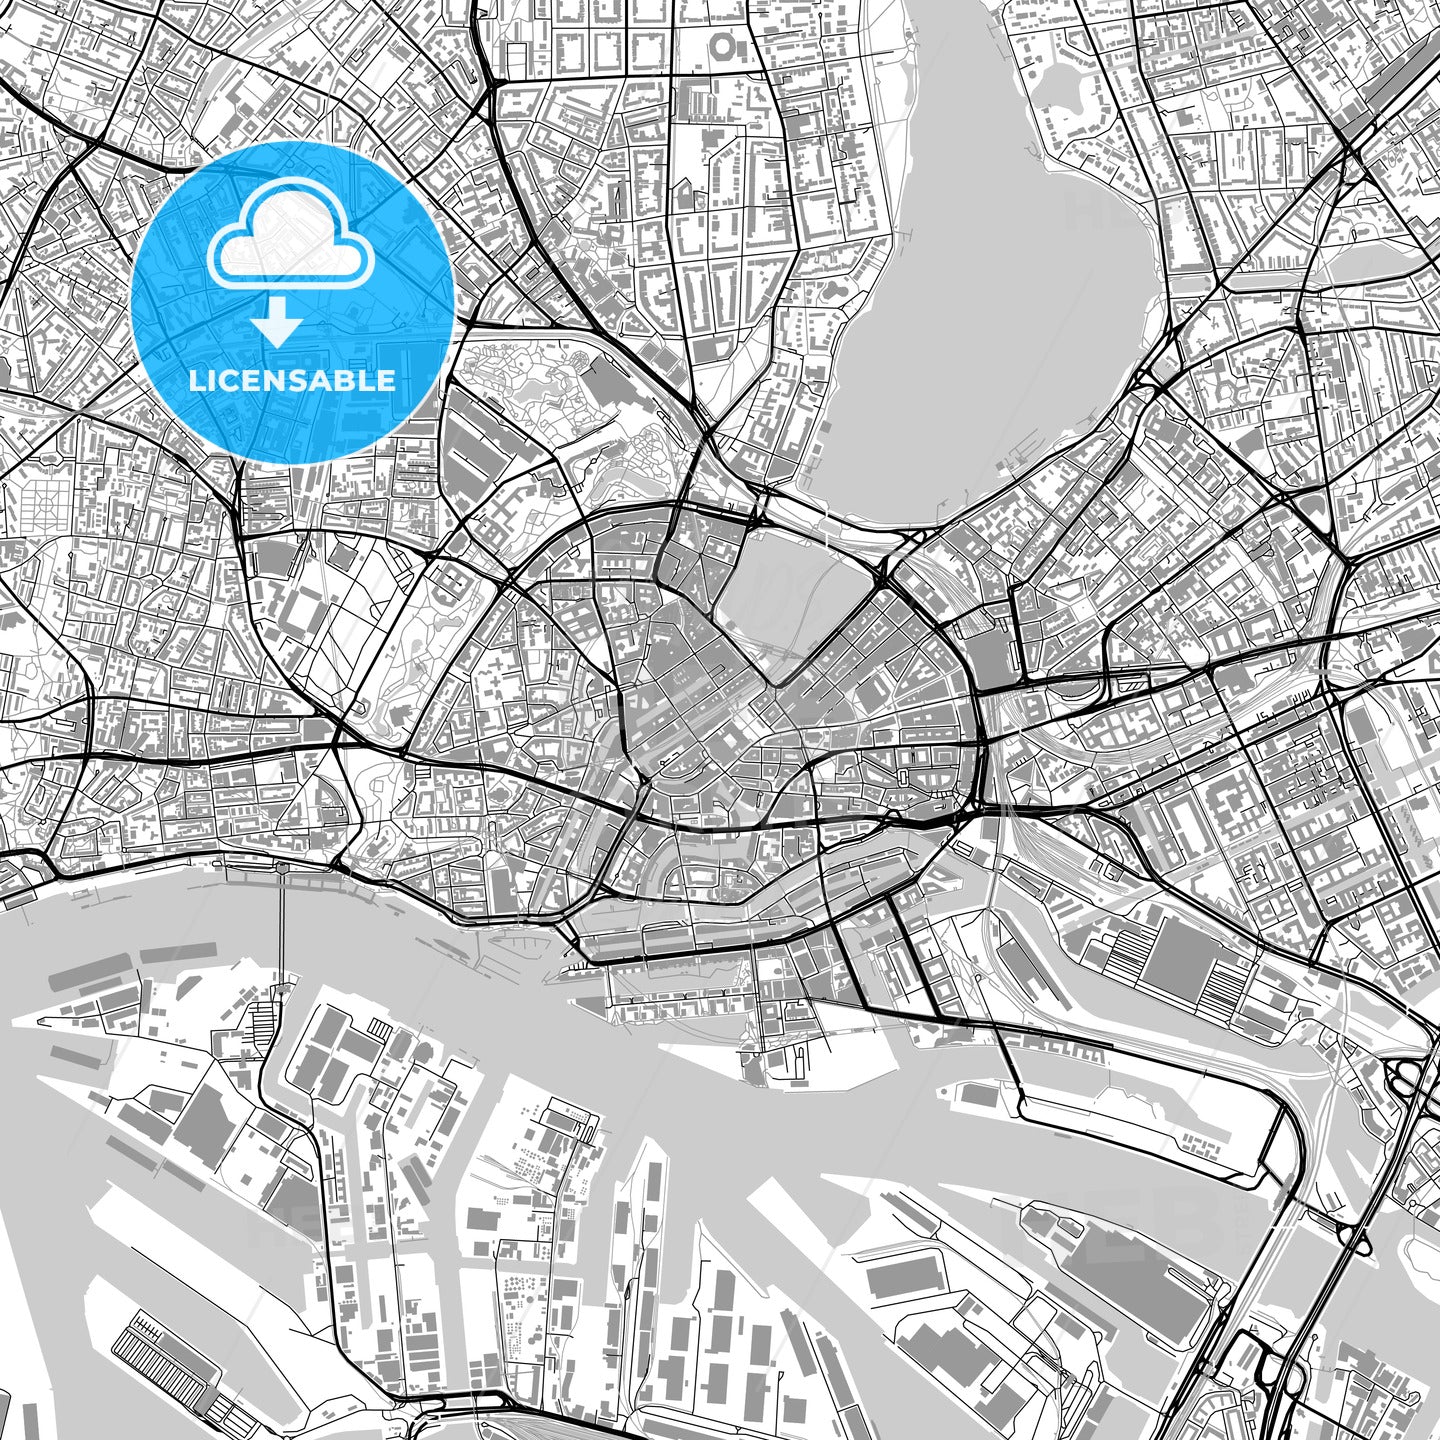 Hamburg downtown map with buildings, light